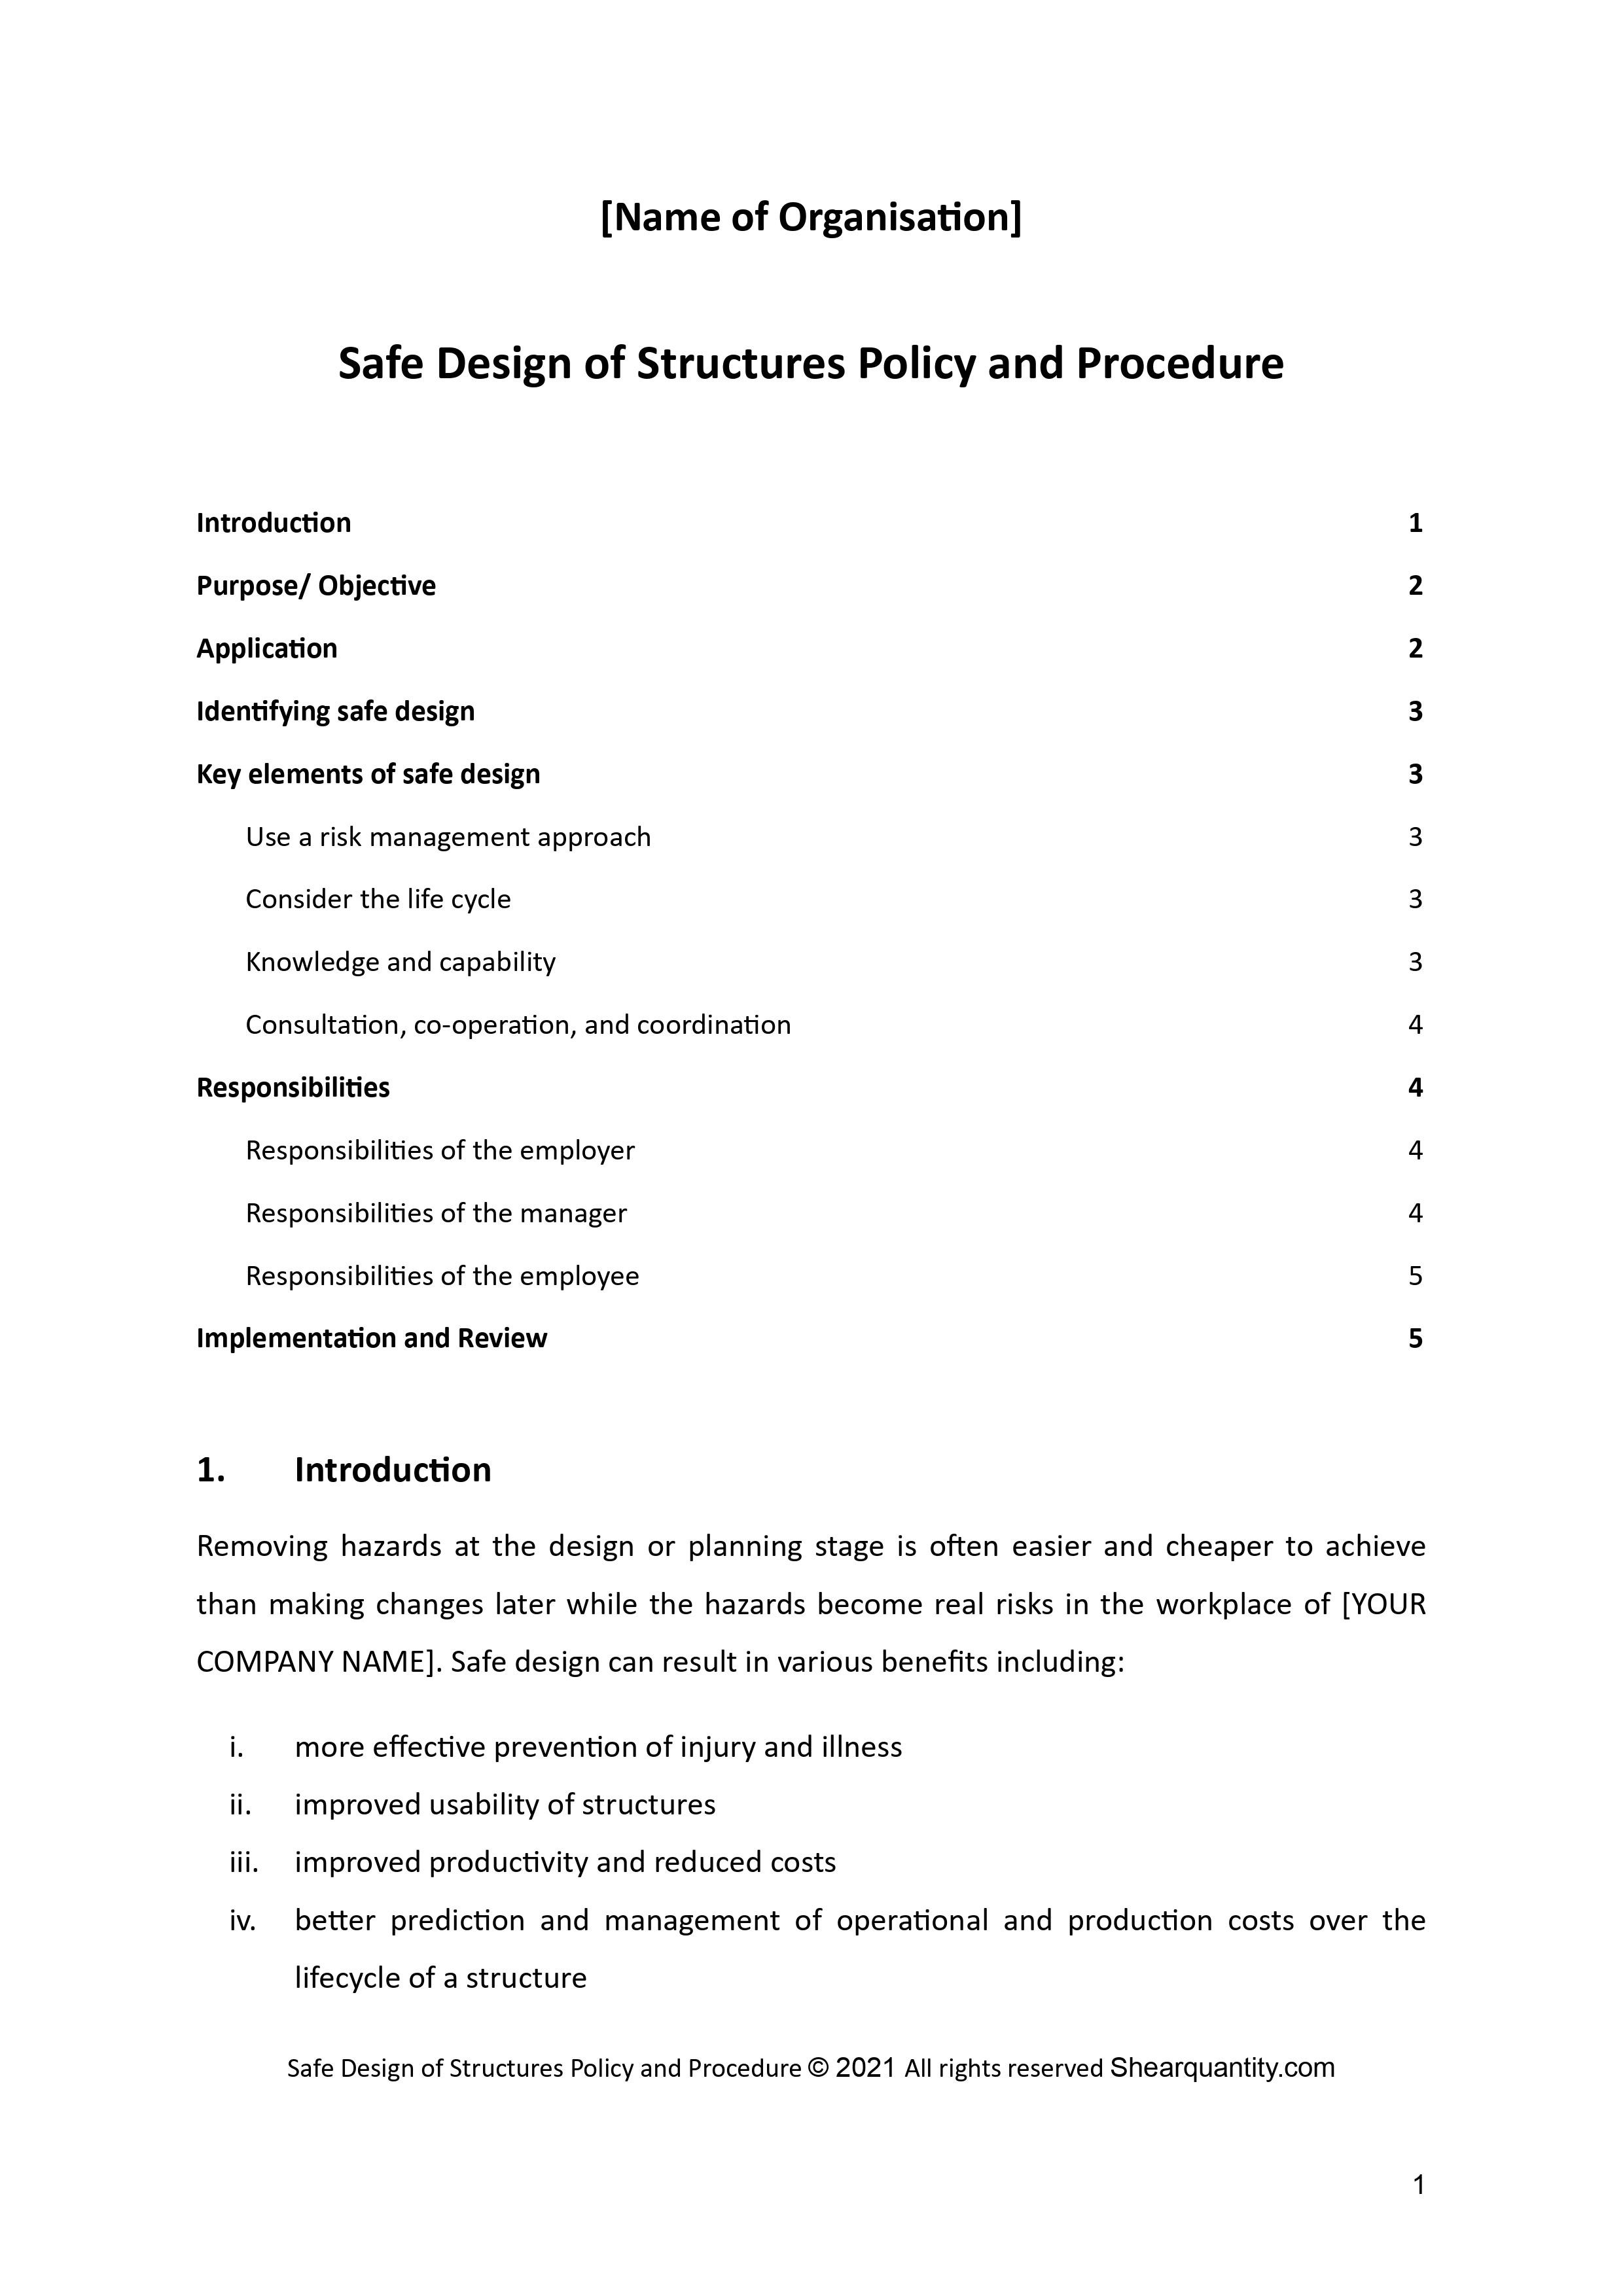 Safe Design of Structures Policy and Procedure